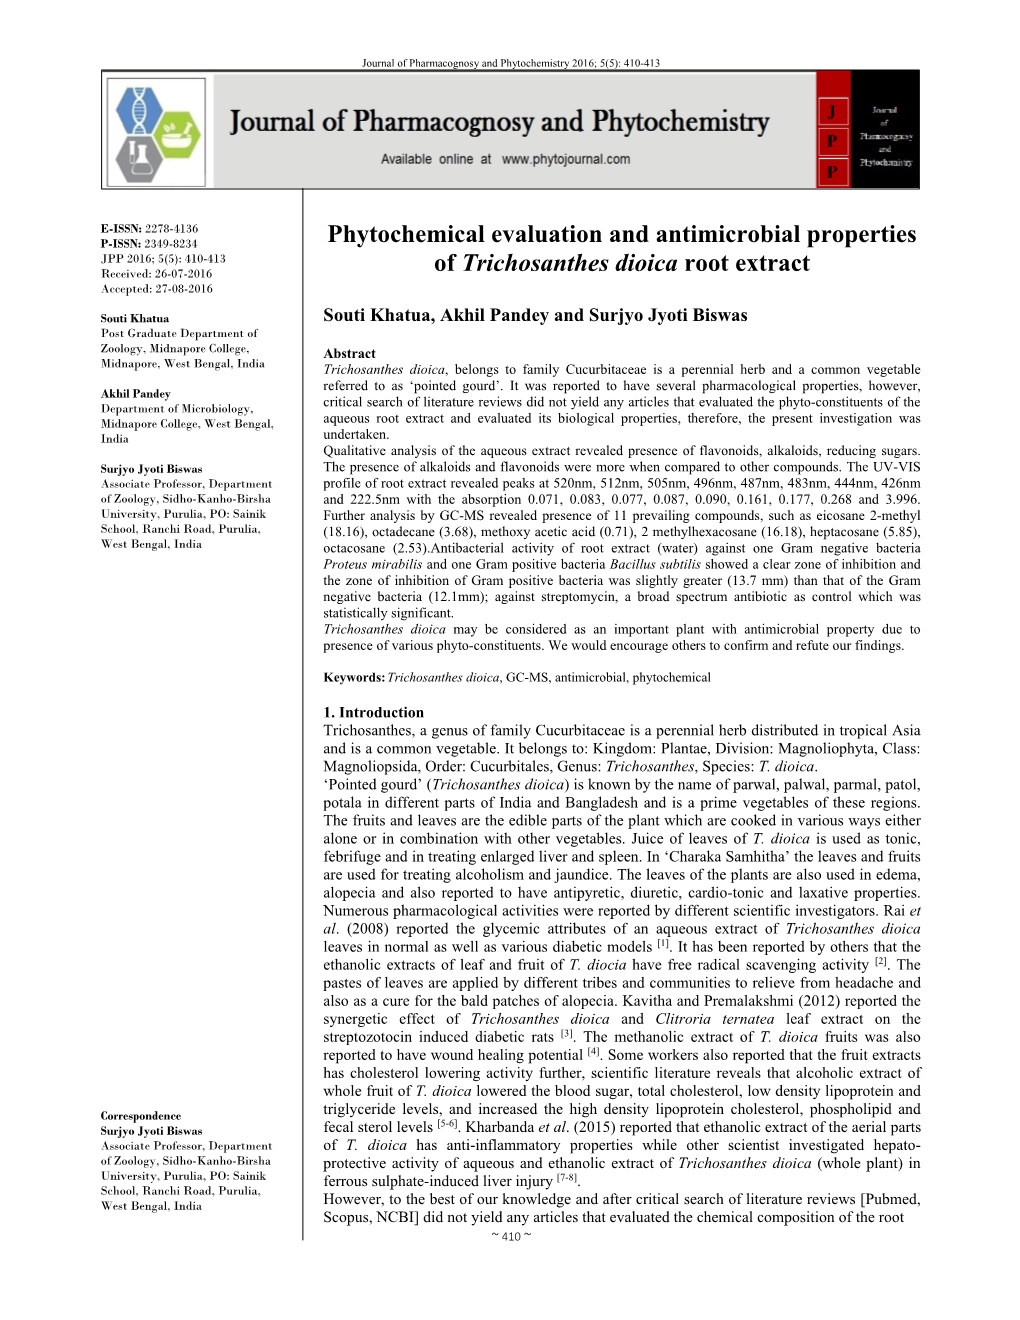 Phytochemical Evaluation and Antimicrobial Properties Of